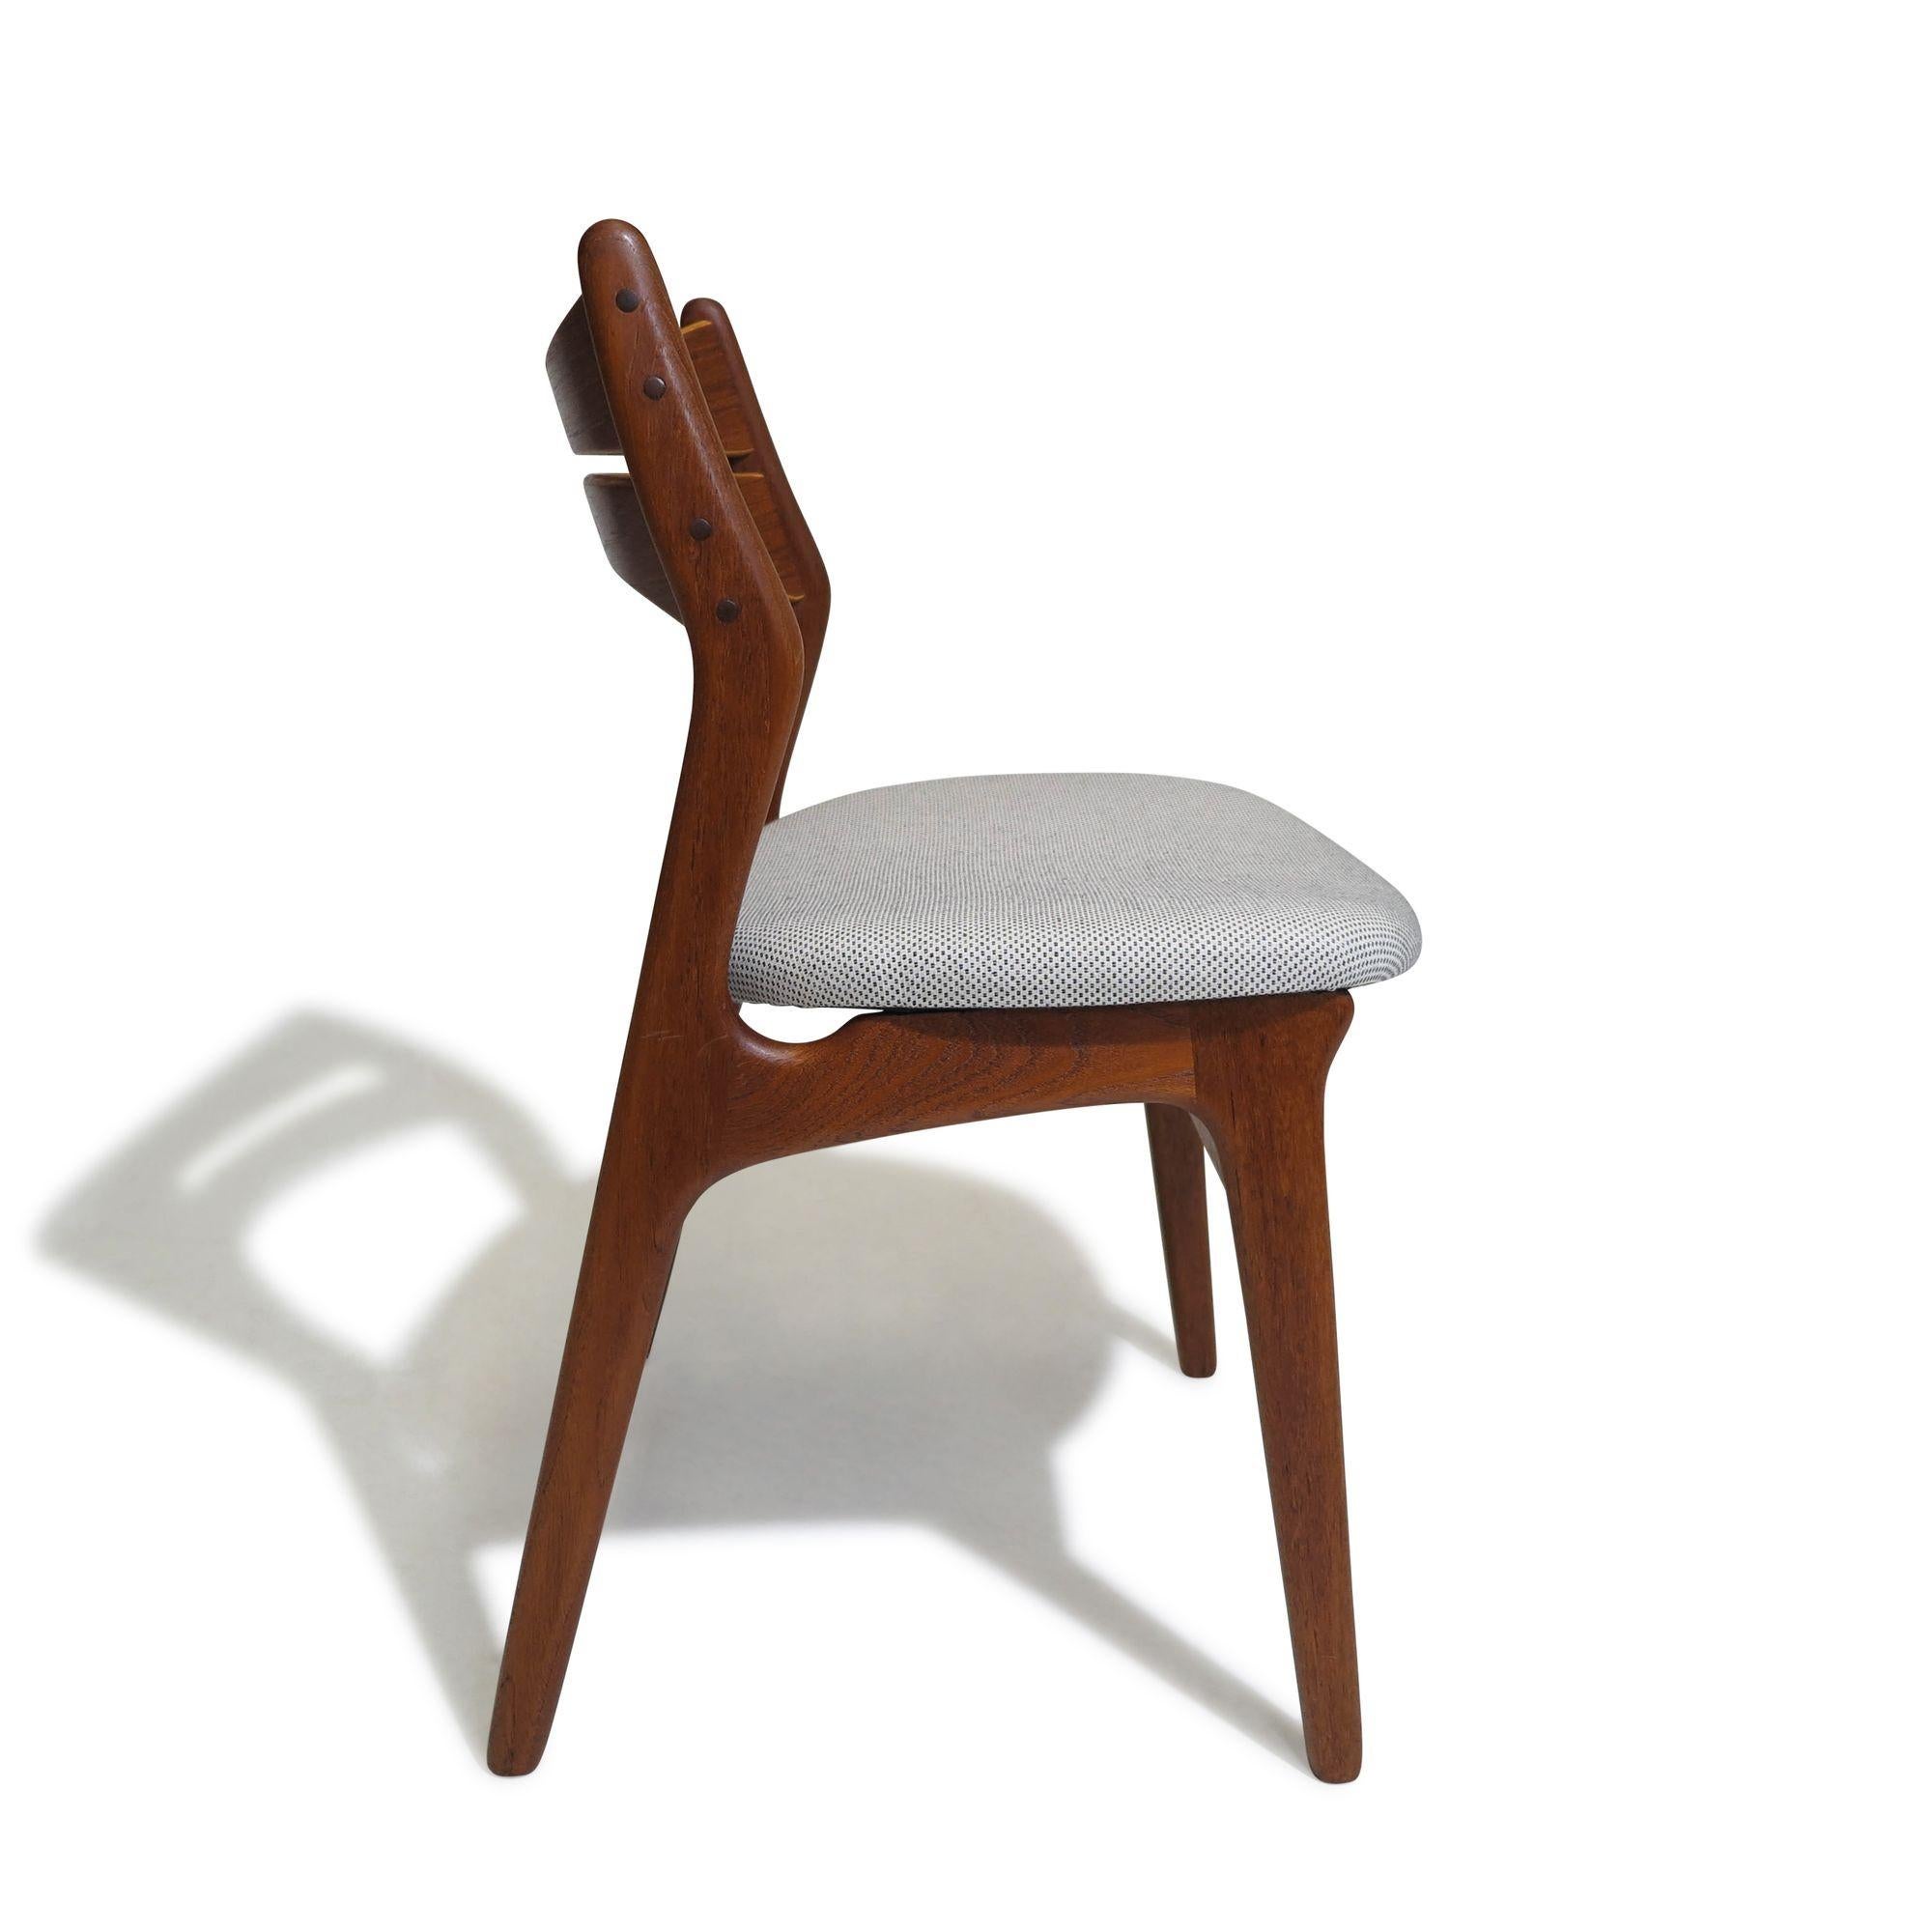 4 Erik Buck Teak Danish Dining Chairs In Excellent Condition For Sale In Oakland, CA